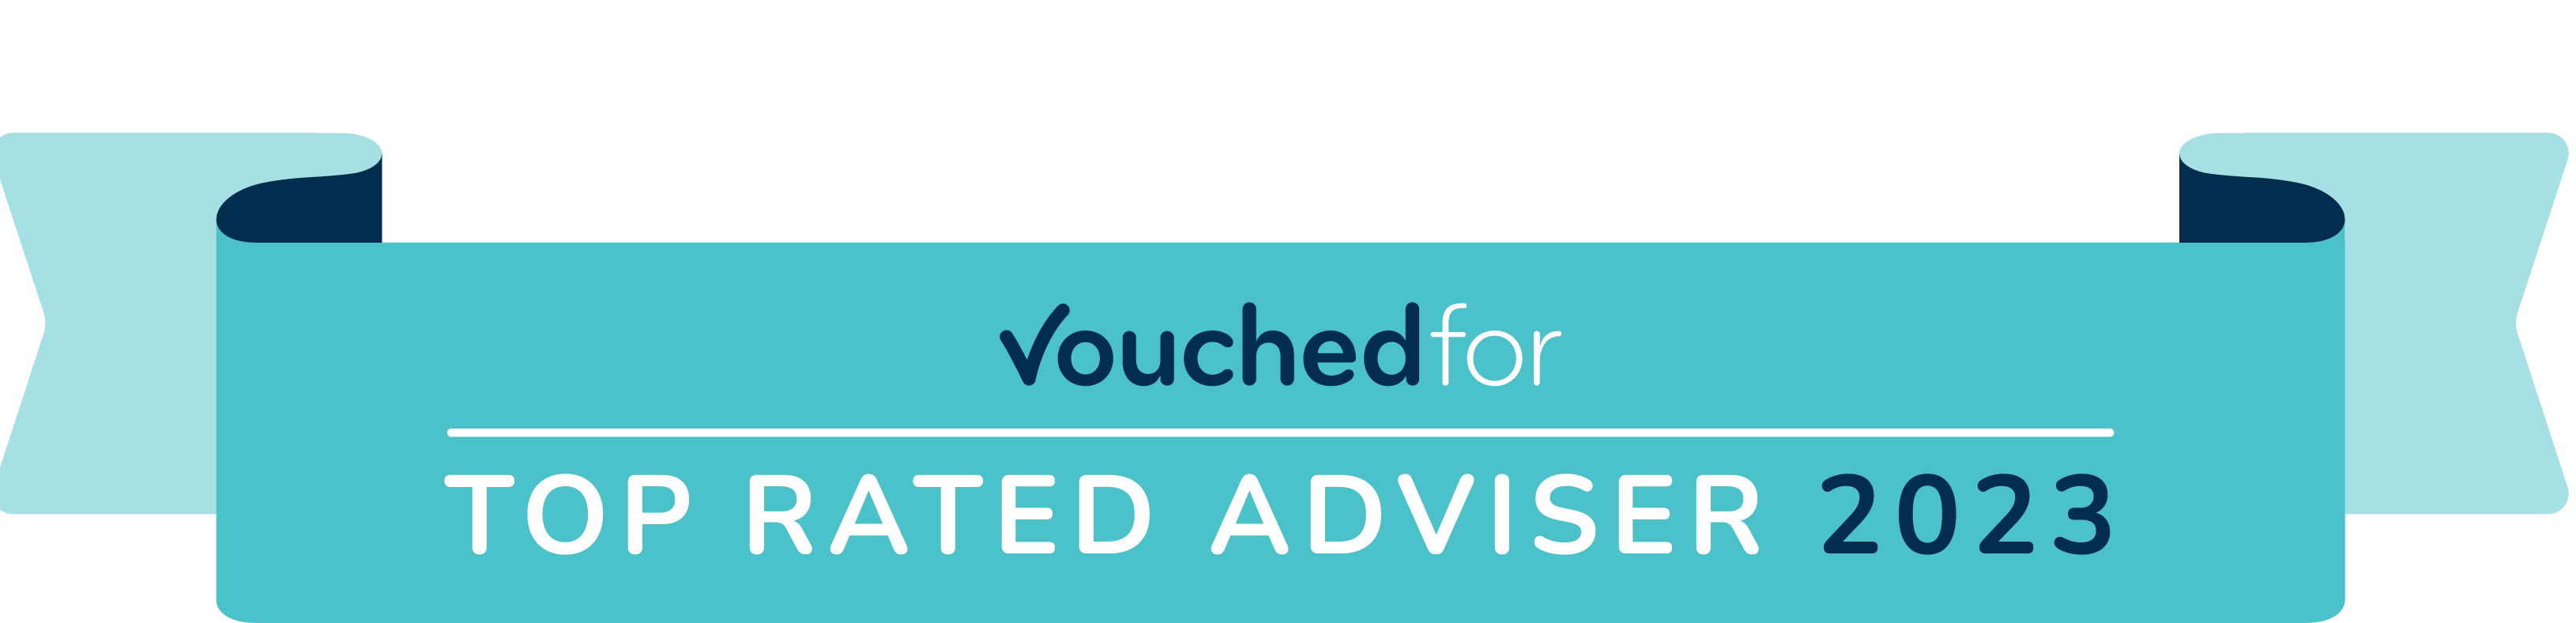 UK top rated adviser 2023